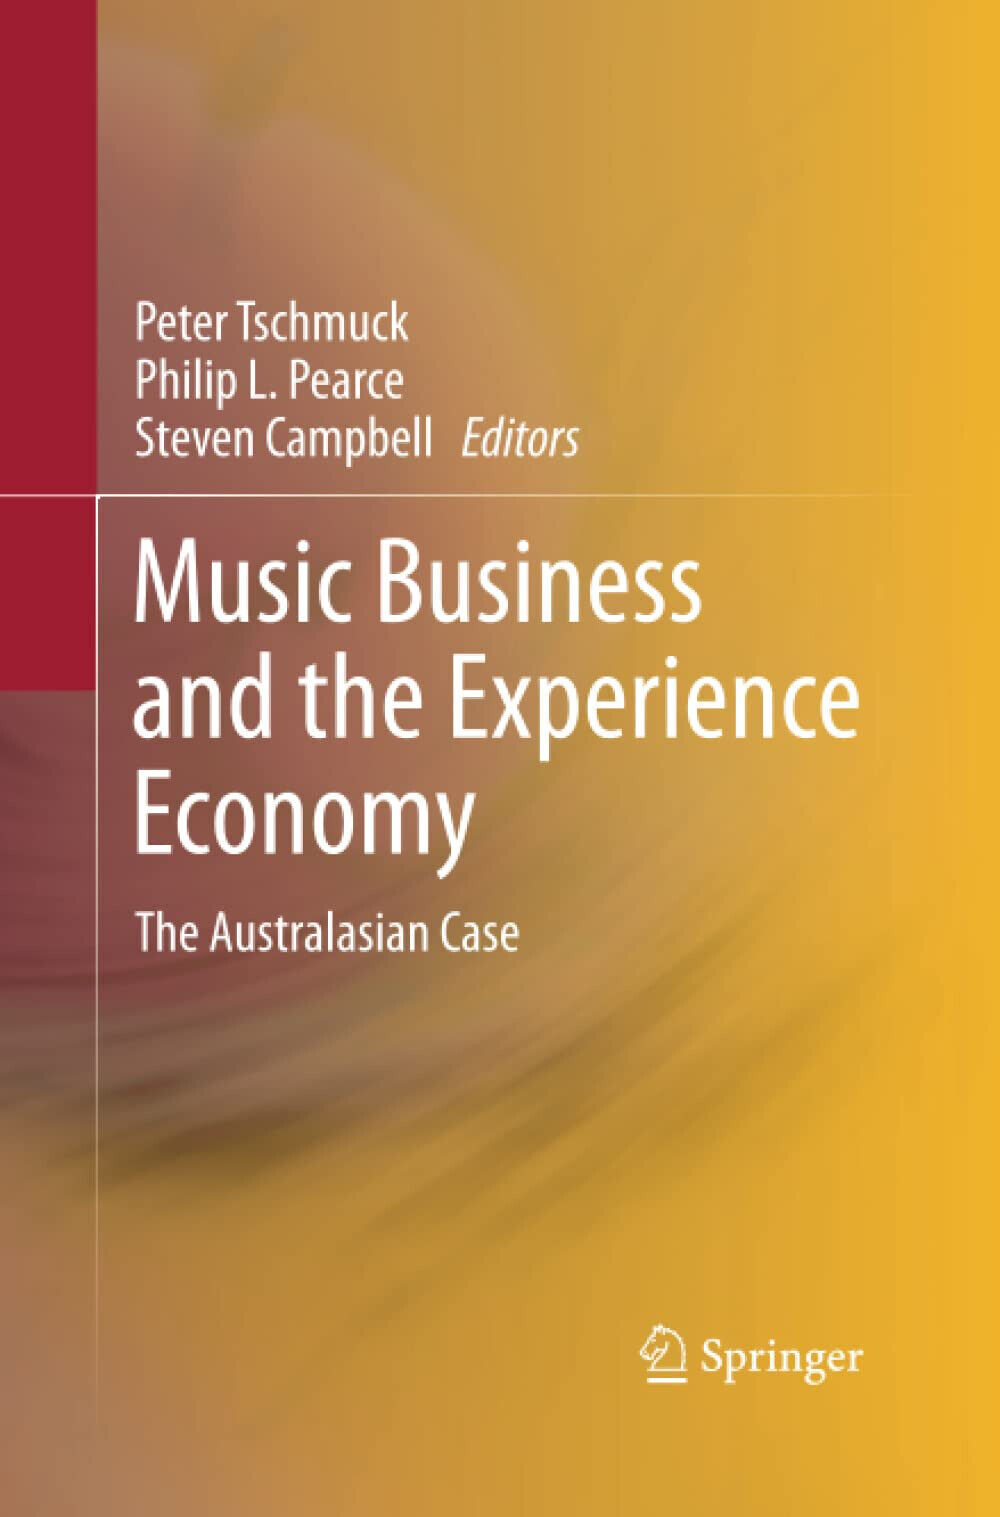 Music Business and the Experience Economy - Peter Tschmuck  - Springer, 2015